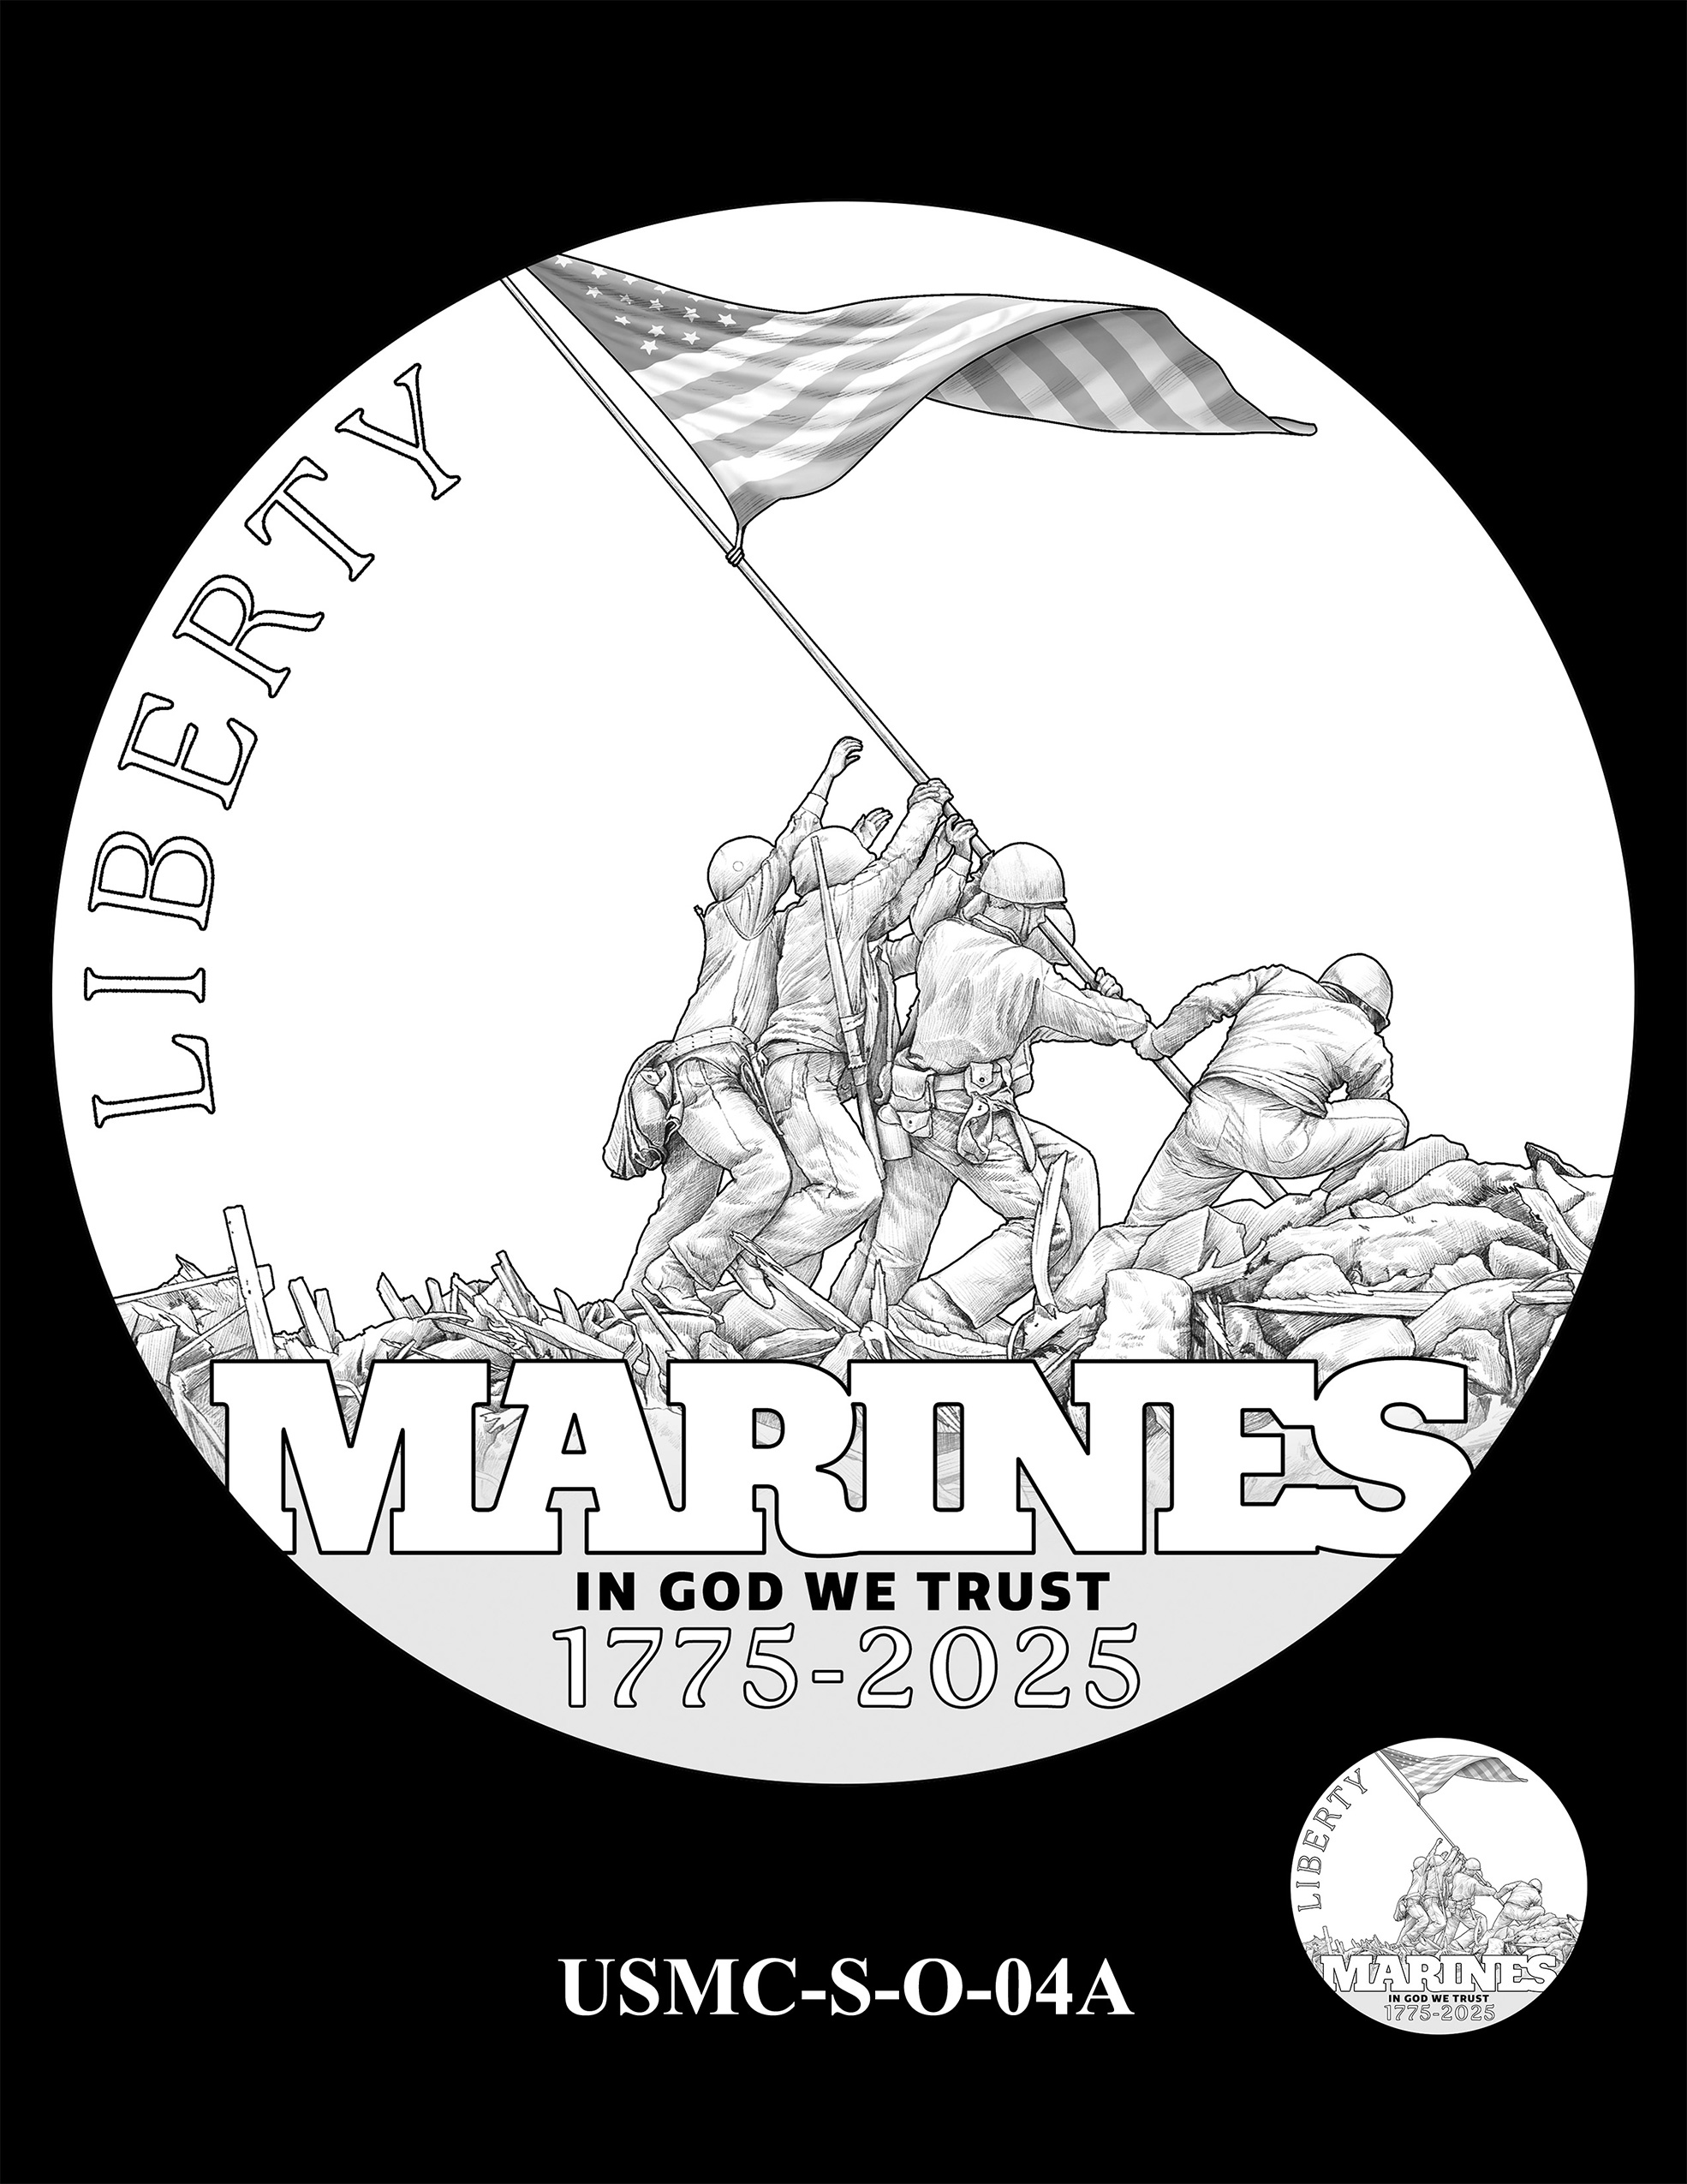 USMC-S-O-04A -- 250th Anniversary of the United States Marine Corps - Silver